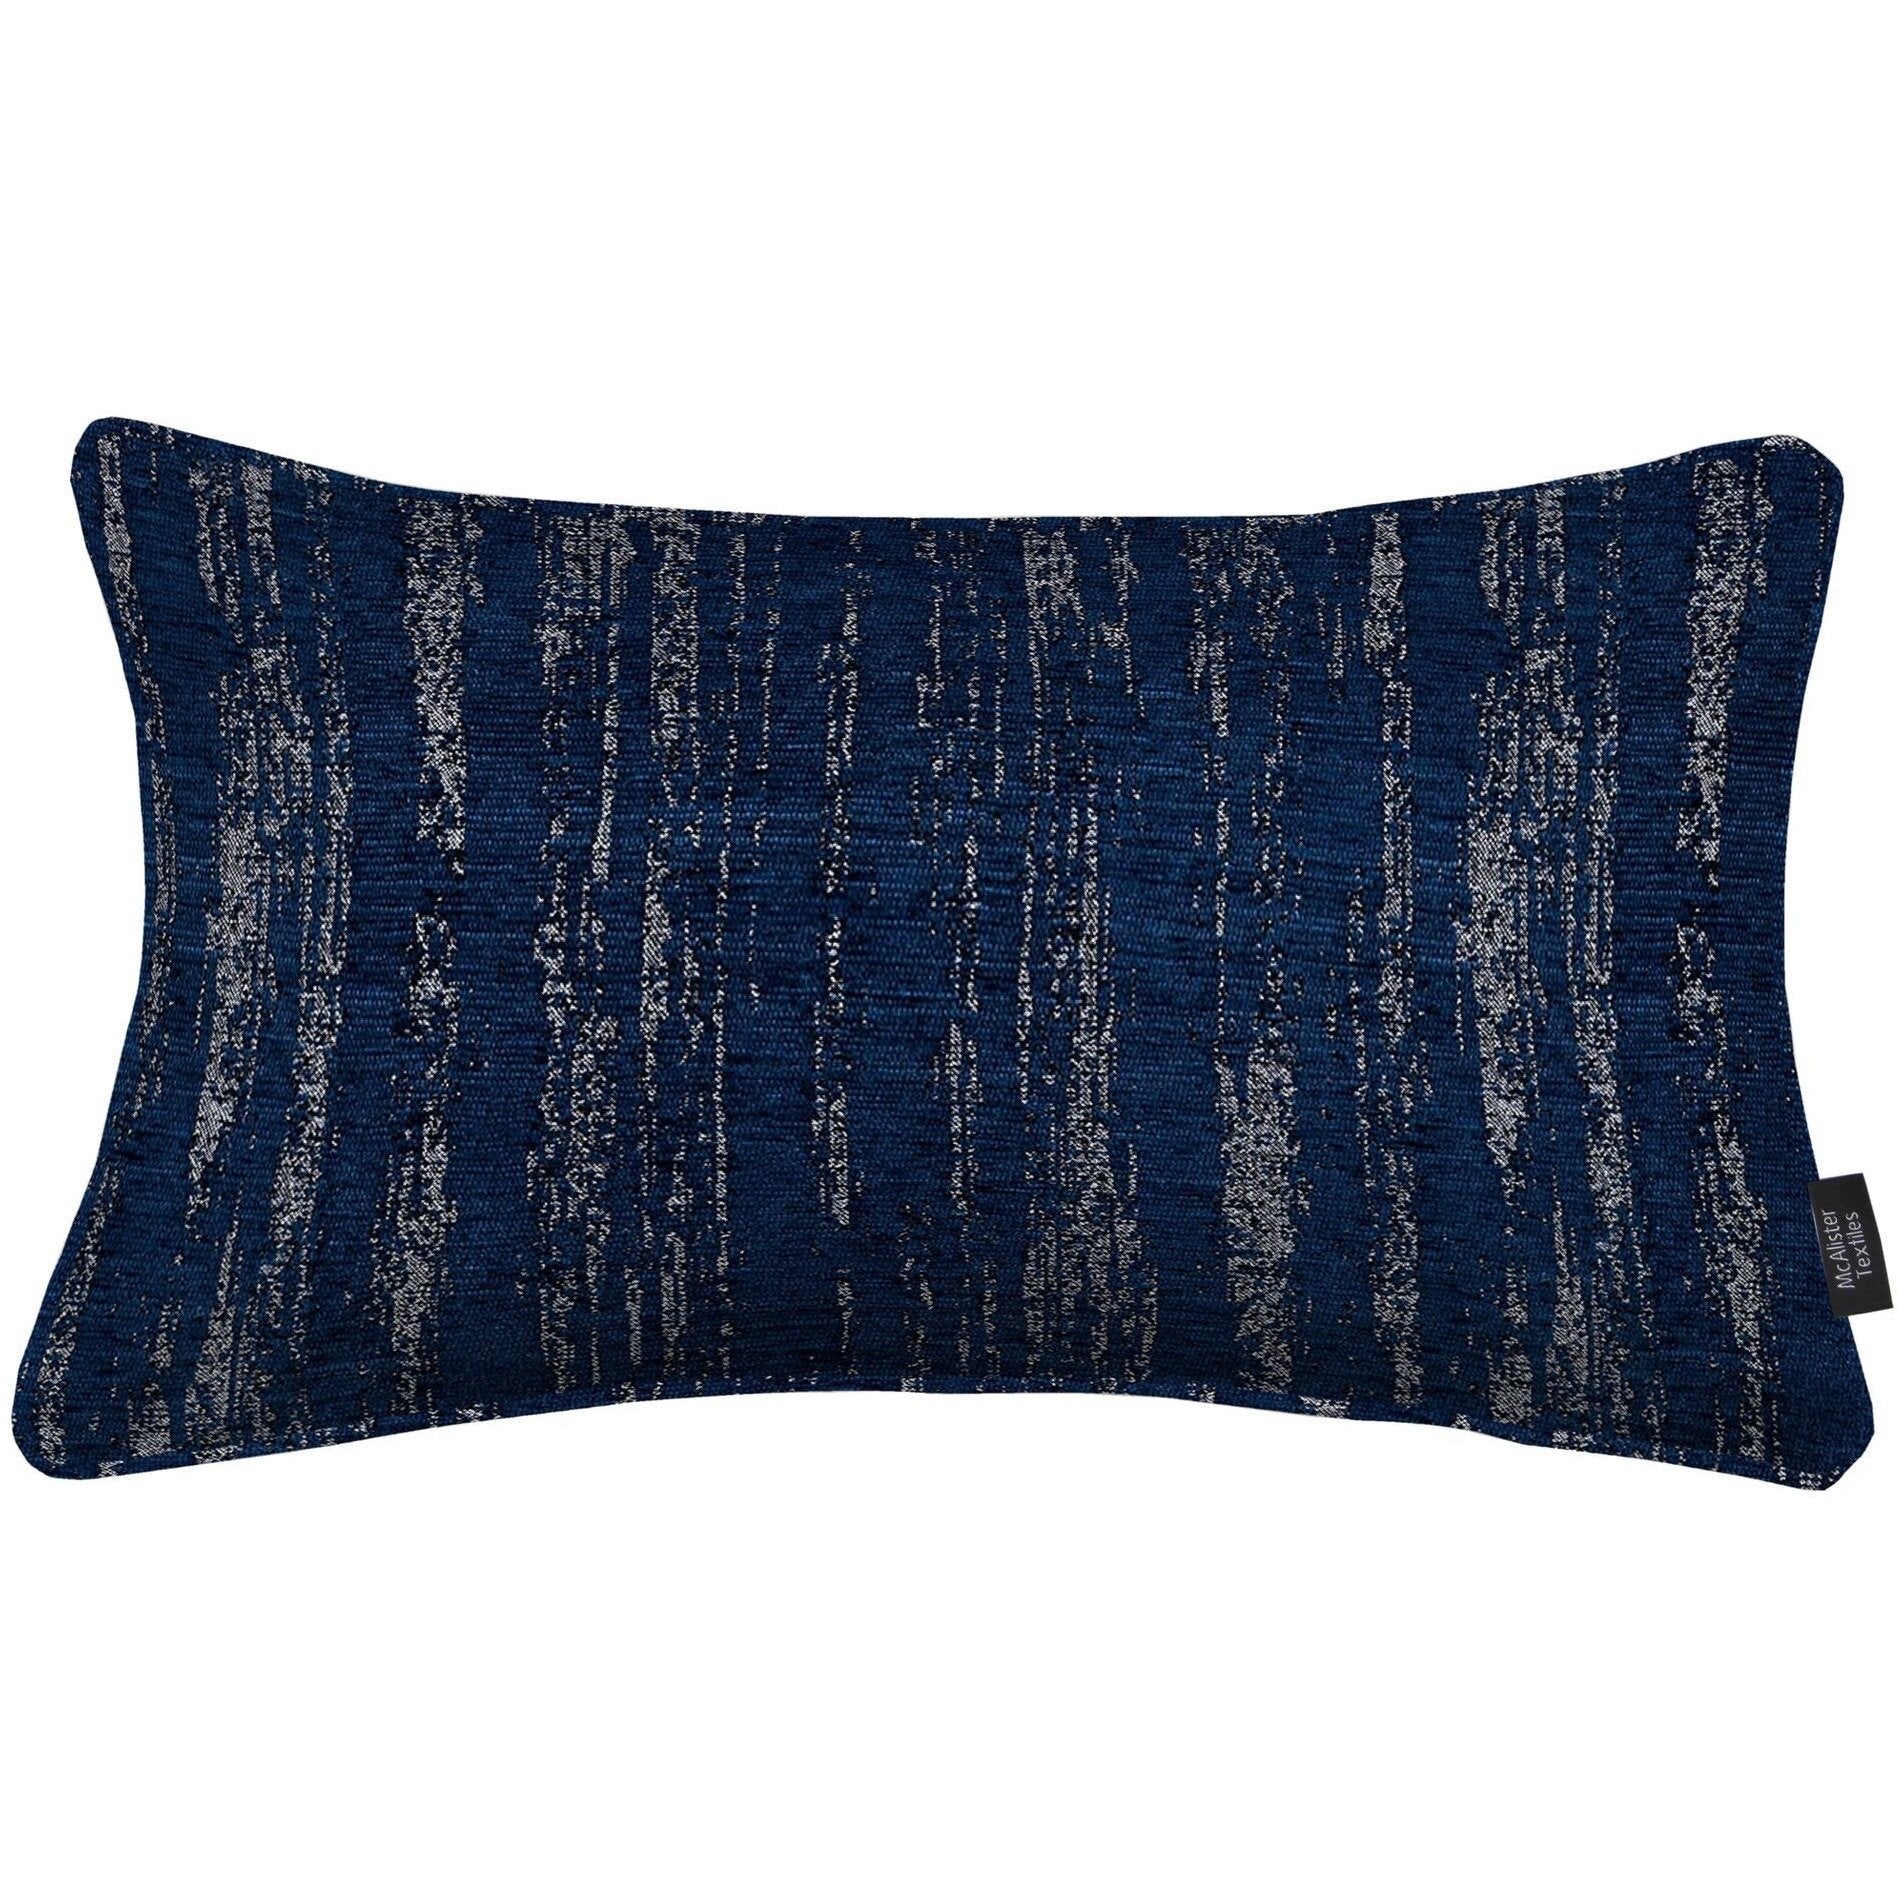 McAlister Textiles Textured Chenille Navy Blue Cushion Cushions and Covers Cover Only 50cm x 30cm 